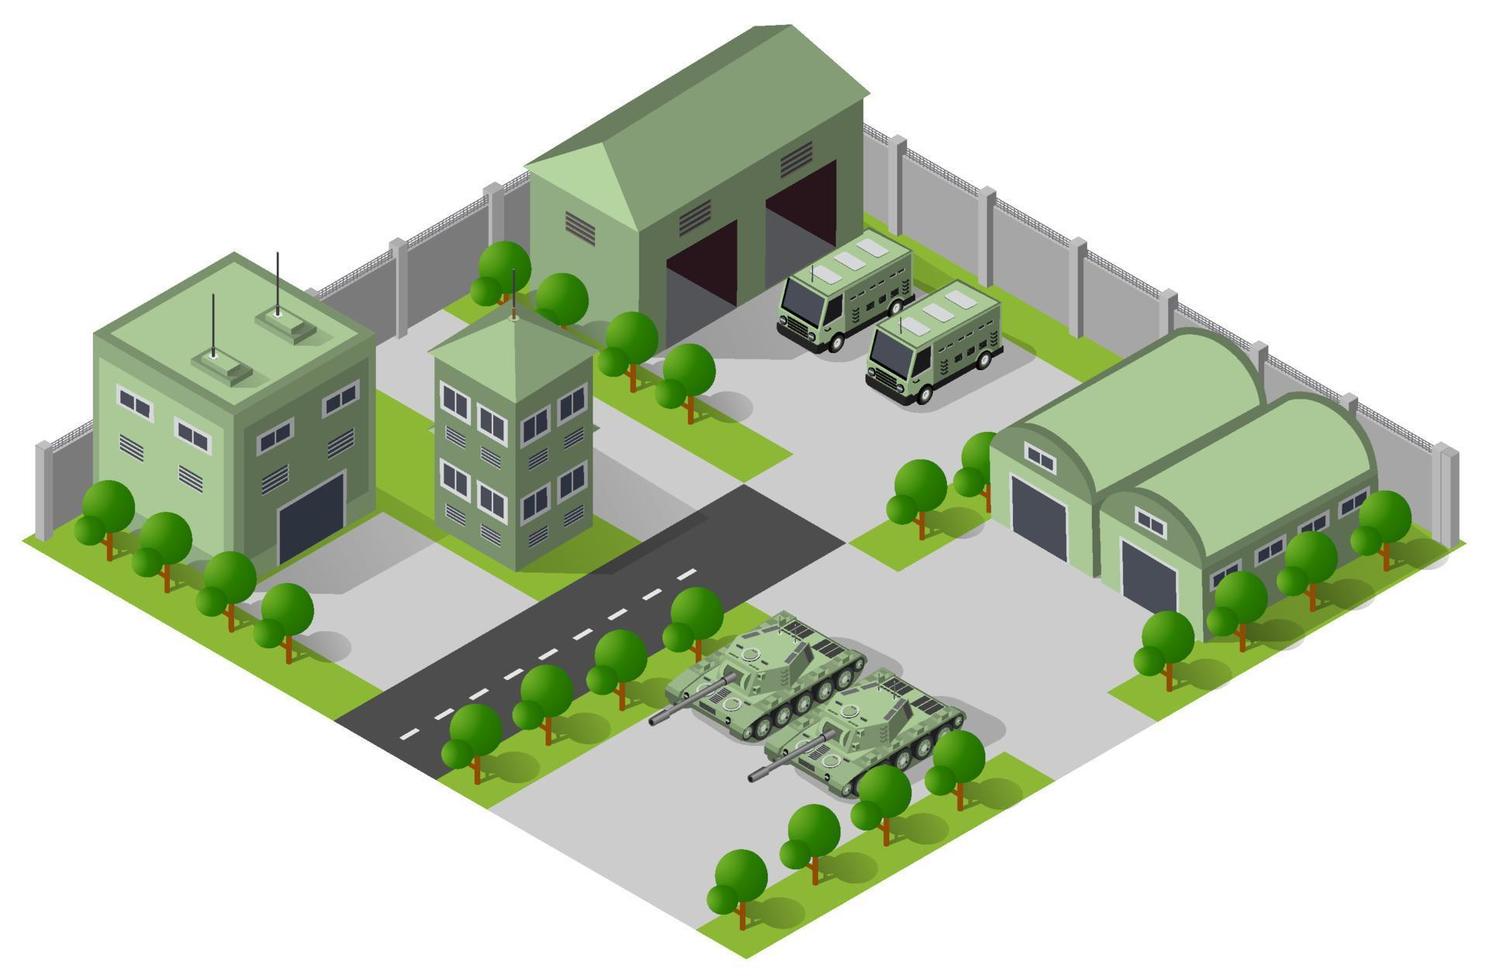 Module base camp object element for building design army armed troop isometric armed military transport objects. War equipment force graphic elements tank machine 3D illustration vector